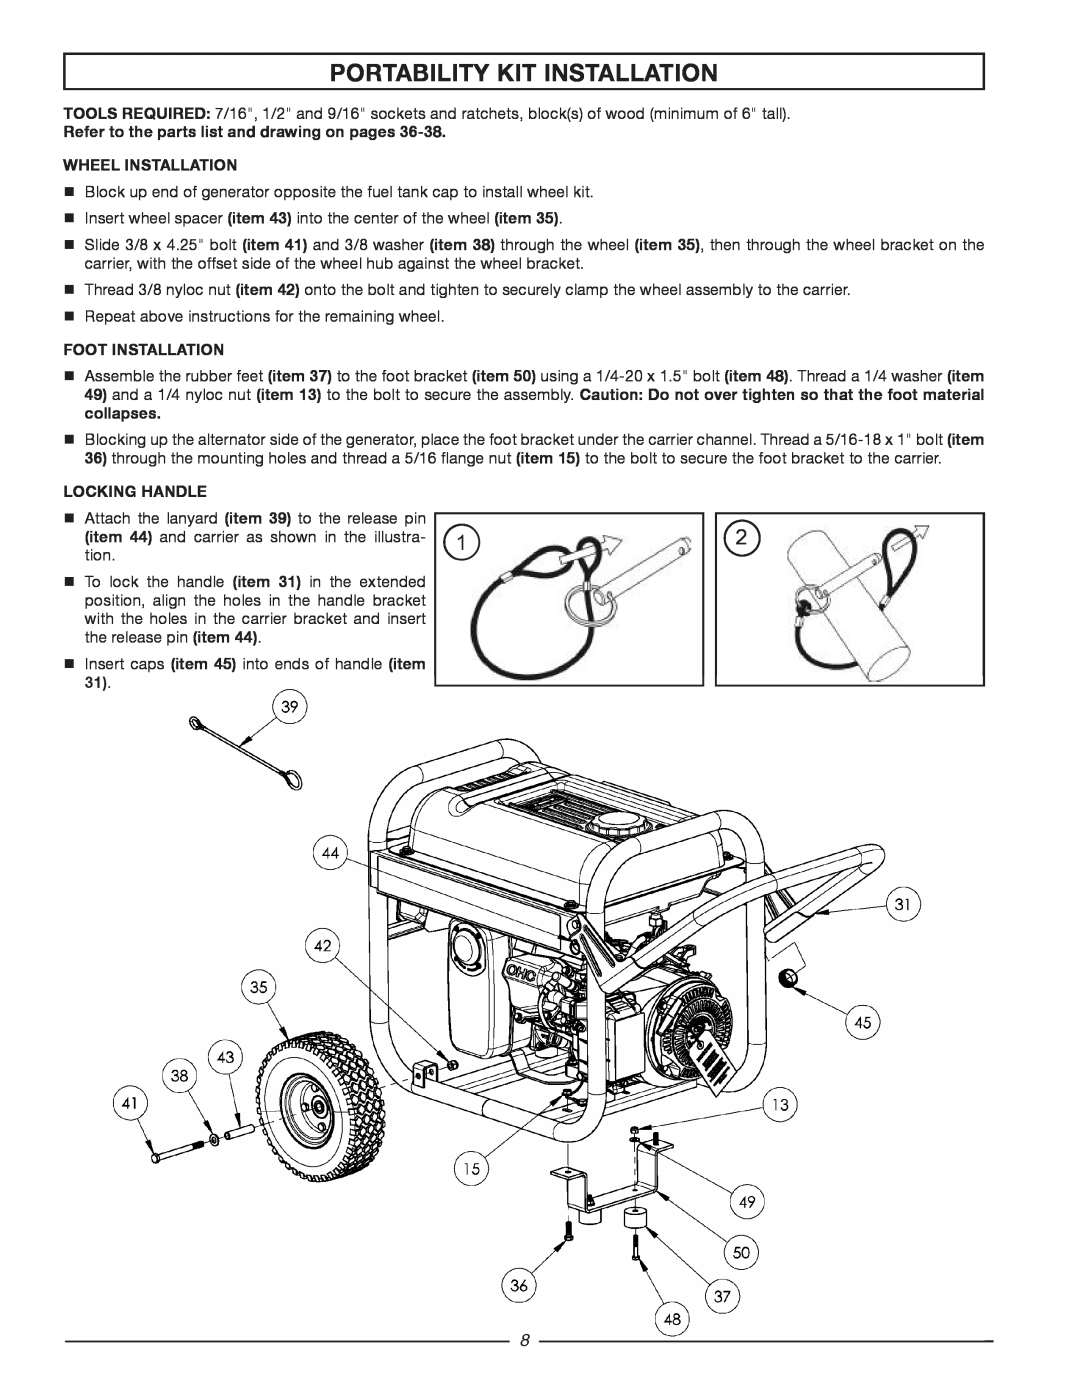 Homelite HG3510 Portability Kit Installation, Refer to the parts list and drawing on pages WHEEL INSTALLATION 